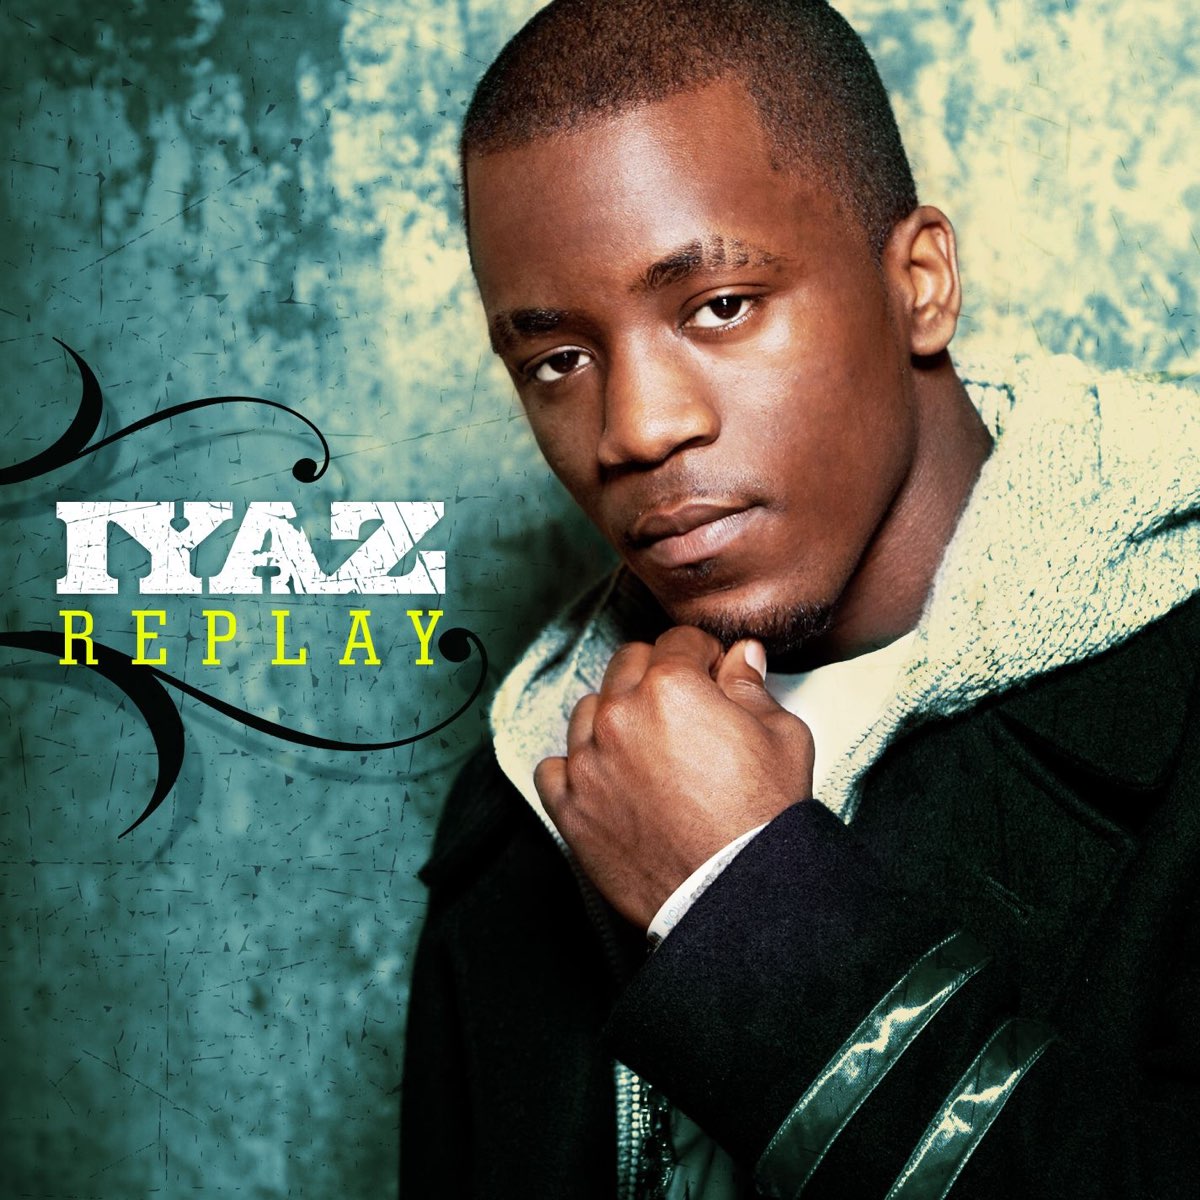 ‎Replay EP by Iyaz on Apple Music